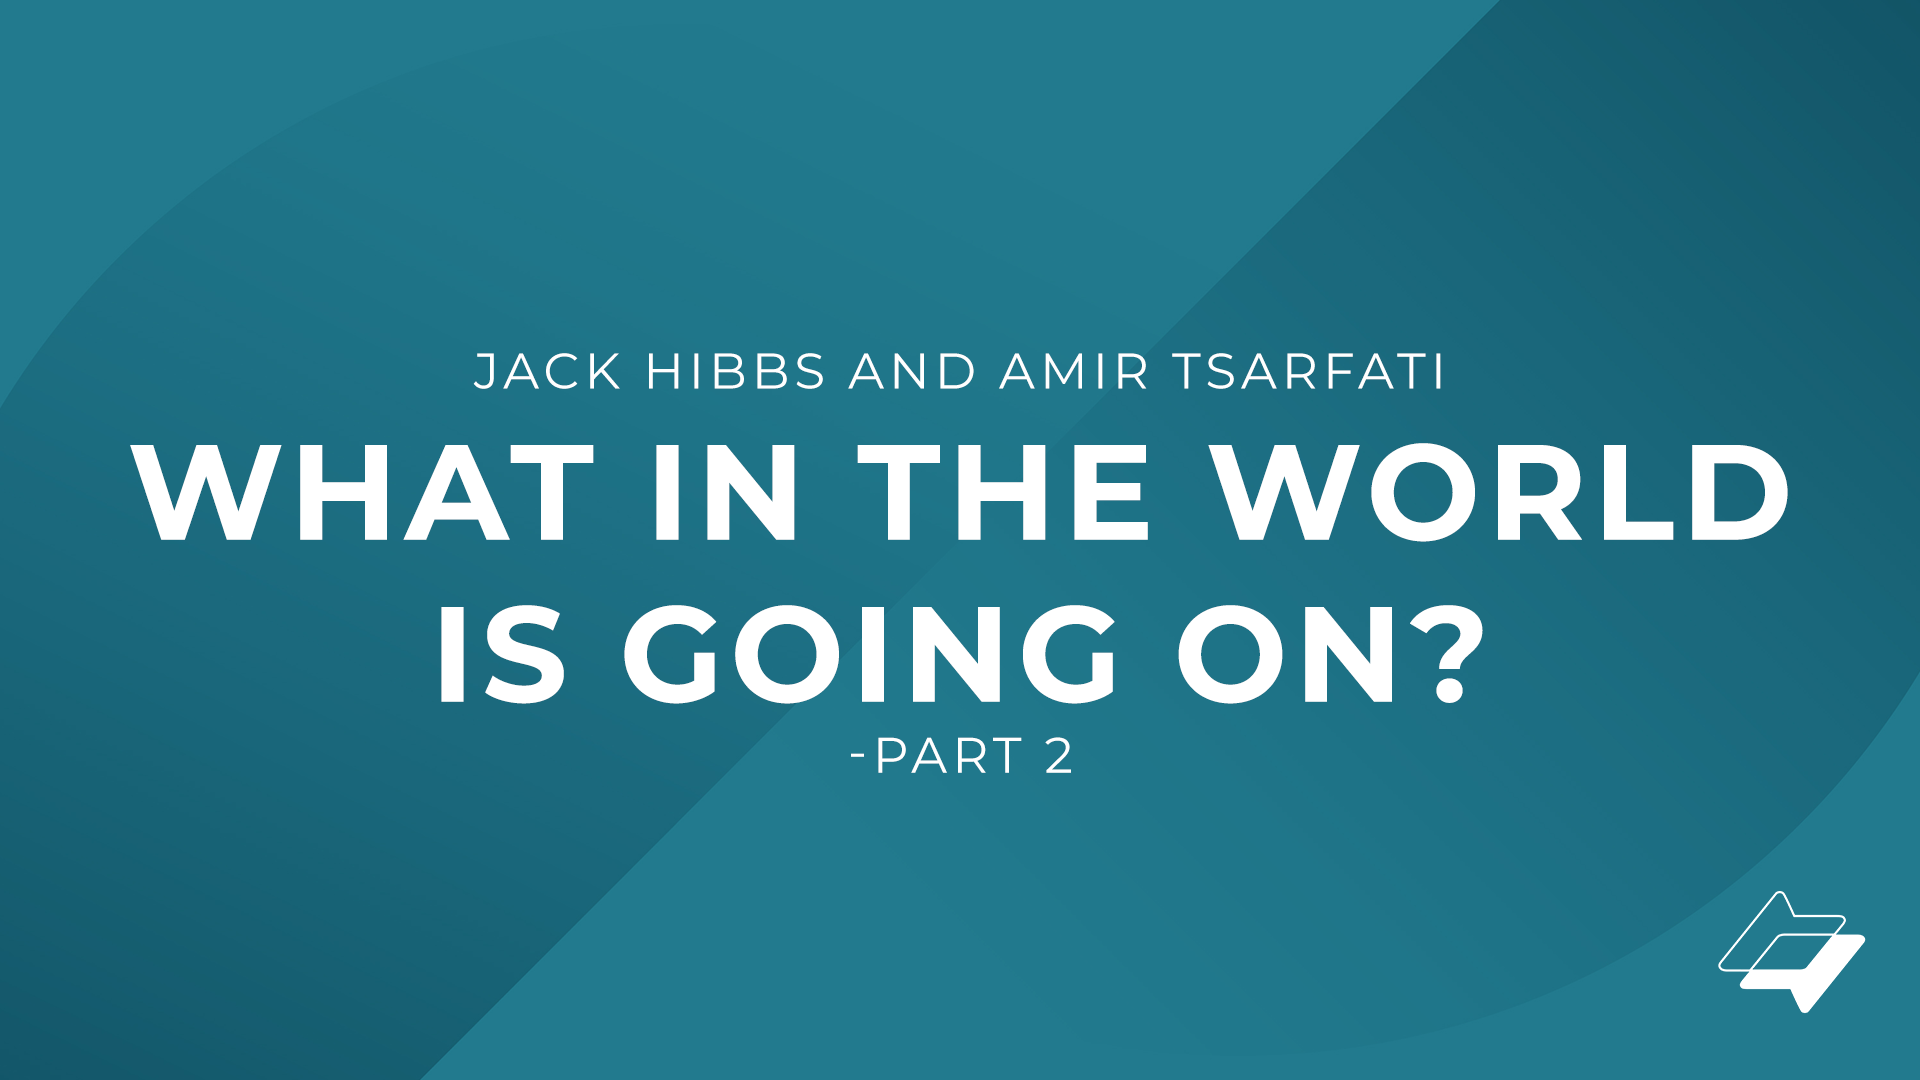 Jack Hibbs and Amir Tsarfati – What in the World is Going On? – Part 2